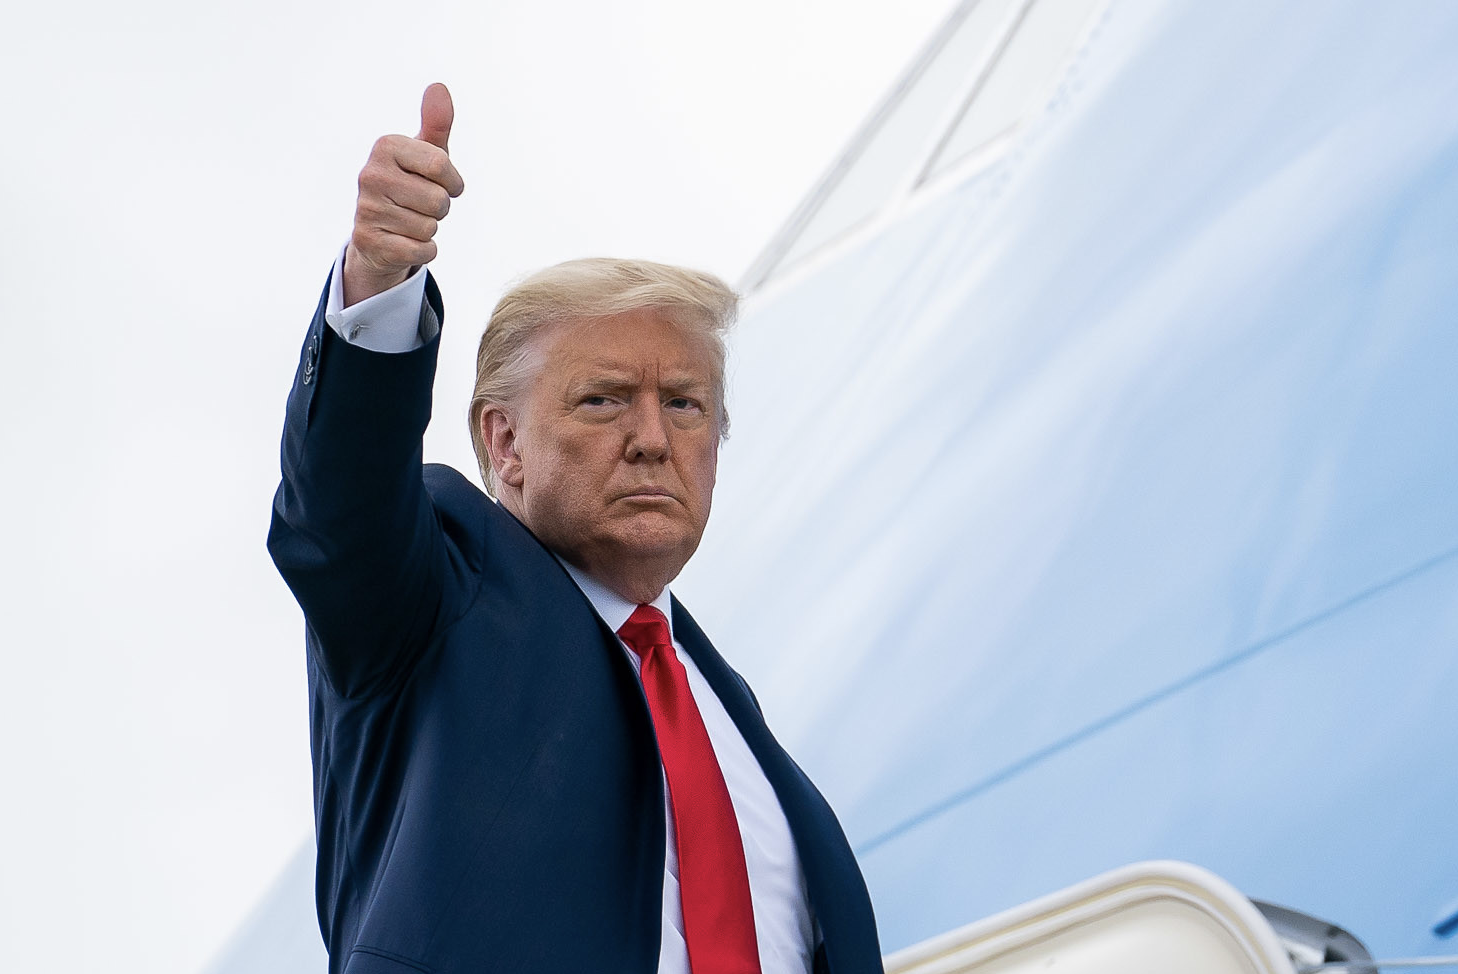 [VIDEO] Trump Says Americans 'Going to be Very Happy' With his 2024 Decision